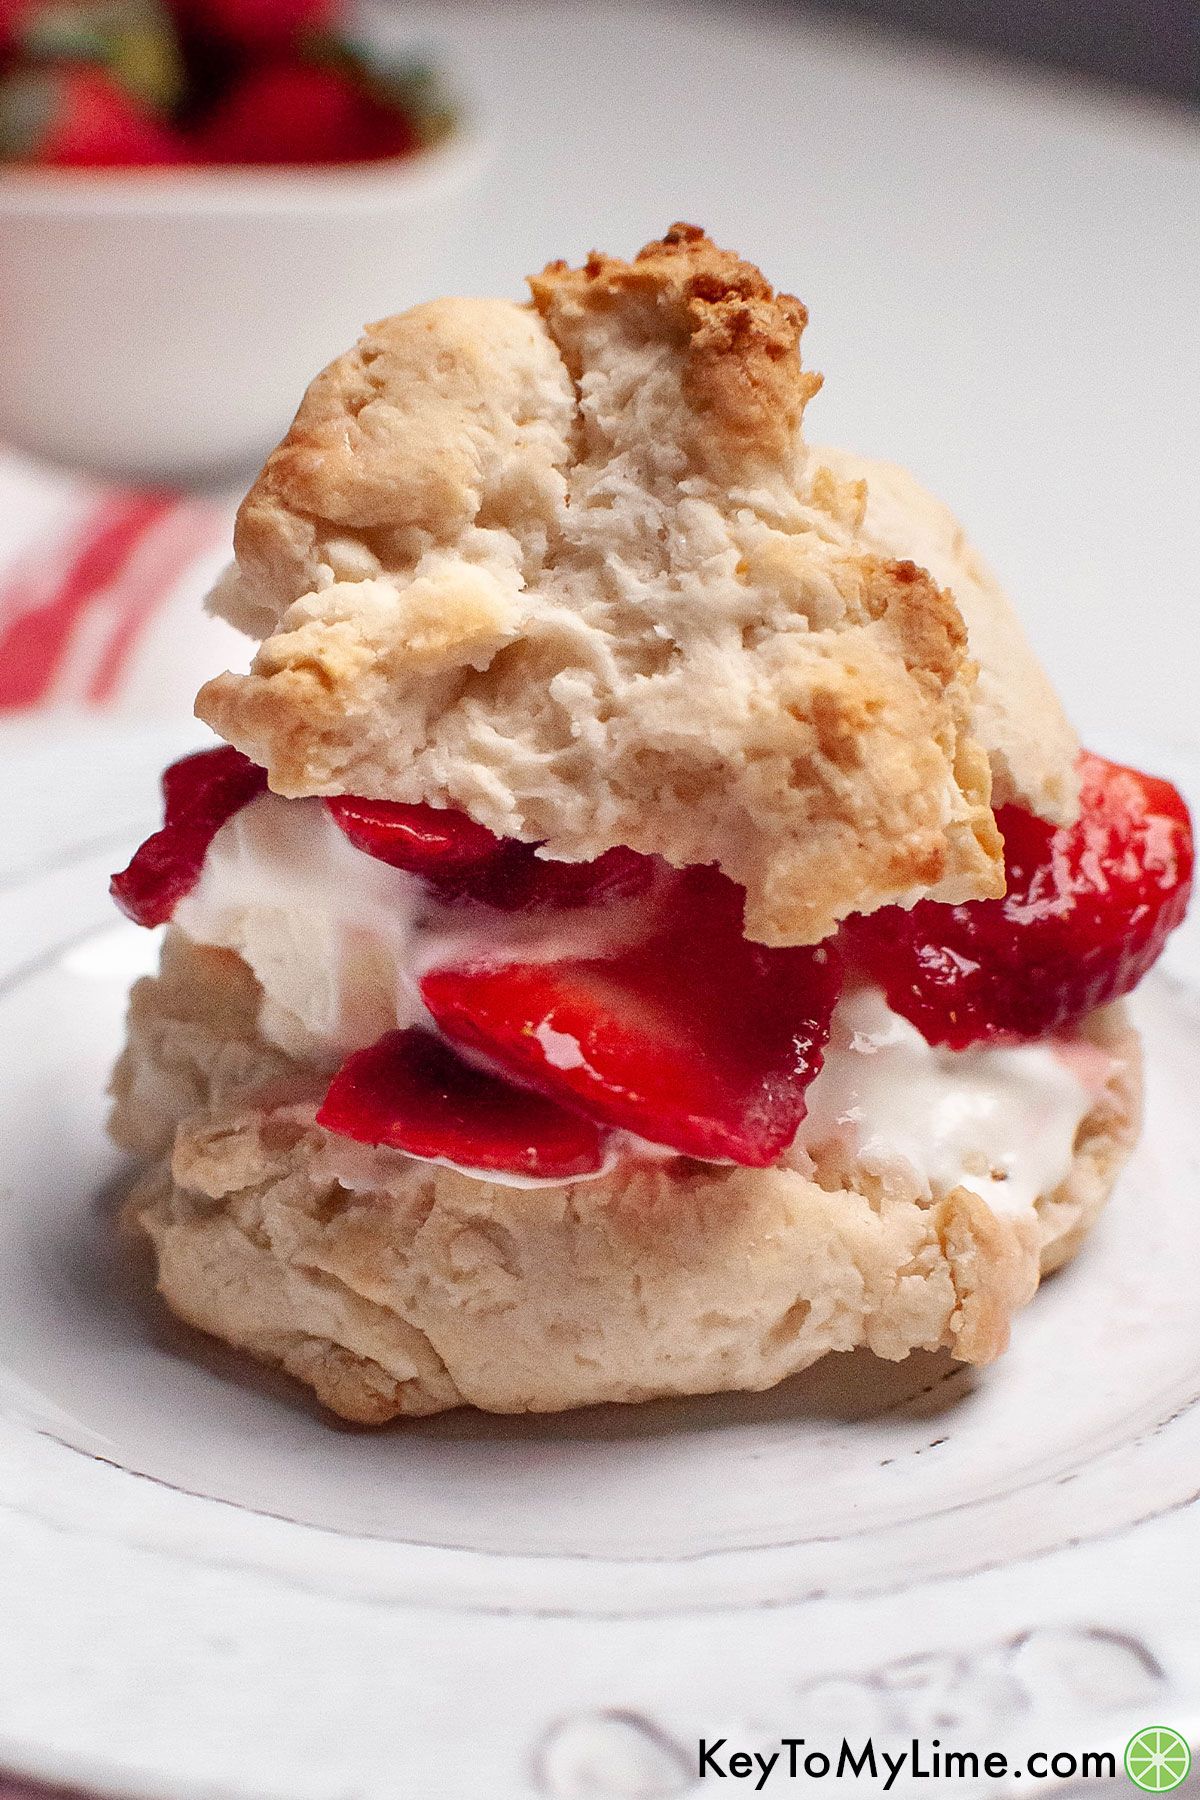 A side image showing the layers of Bisquick strawberry shortcakes.